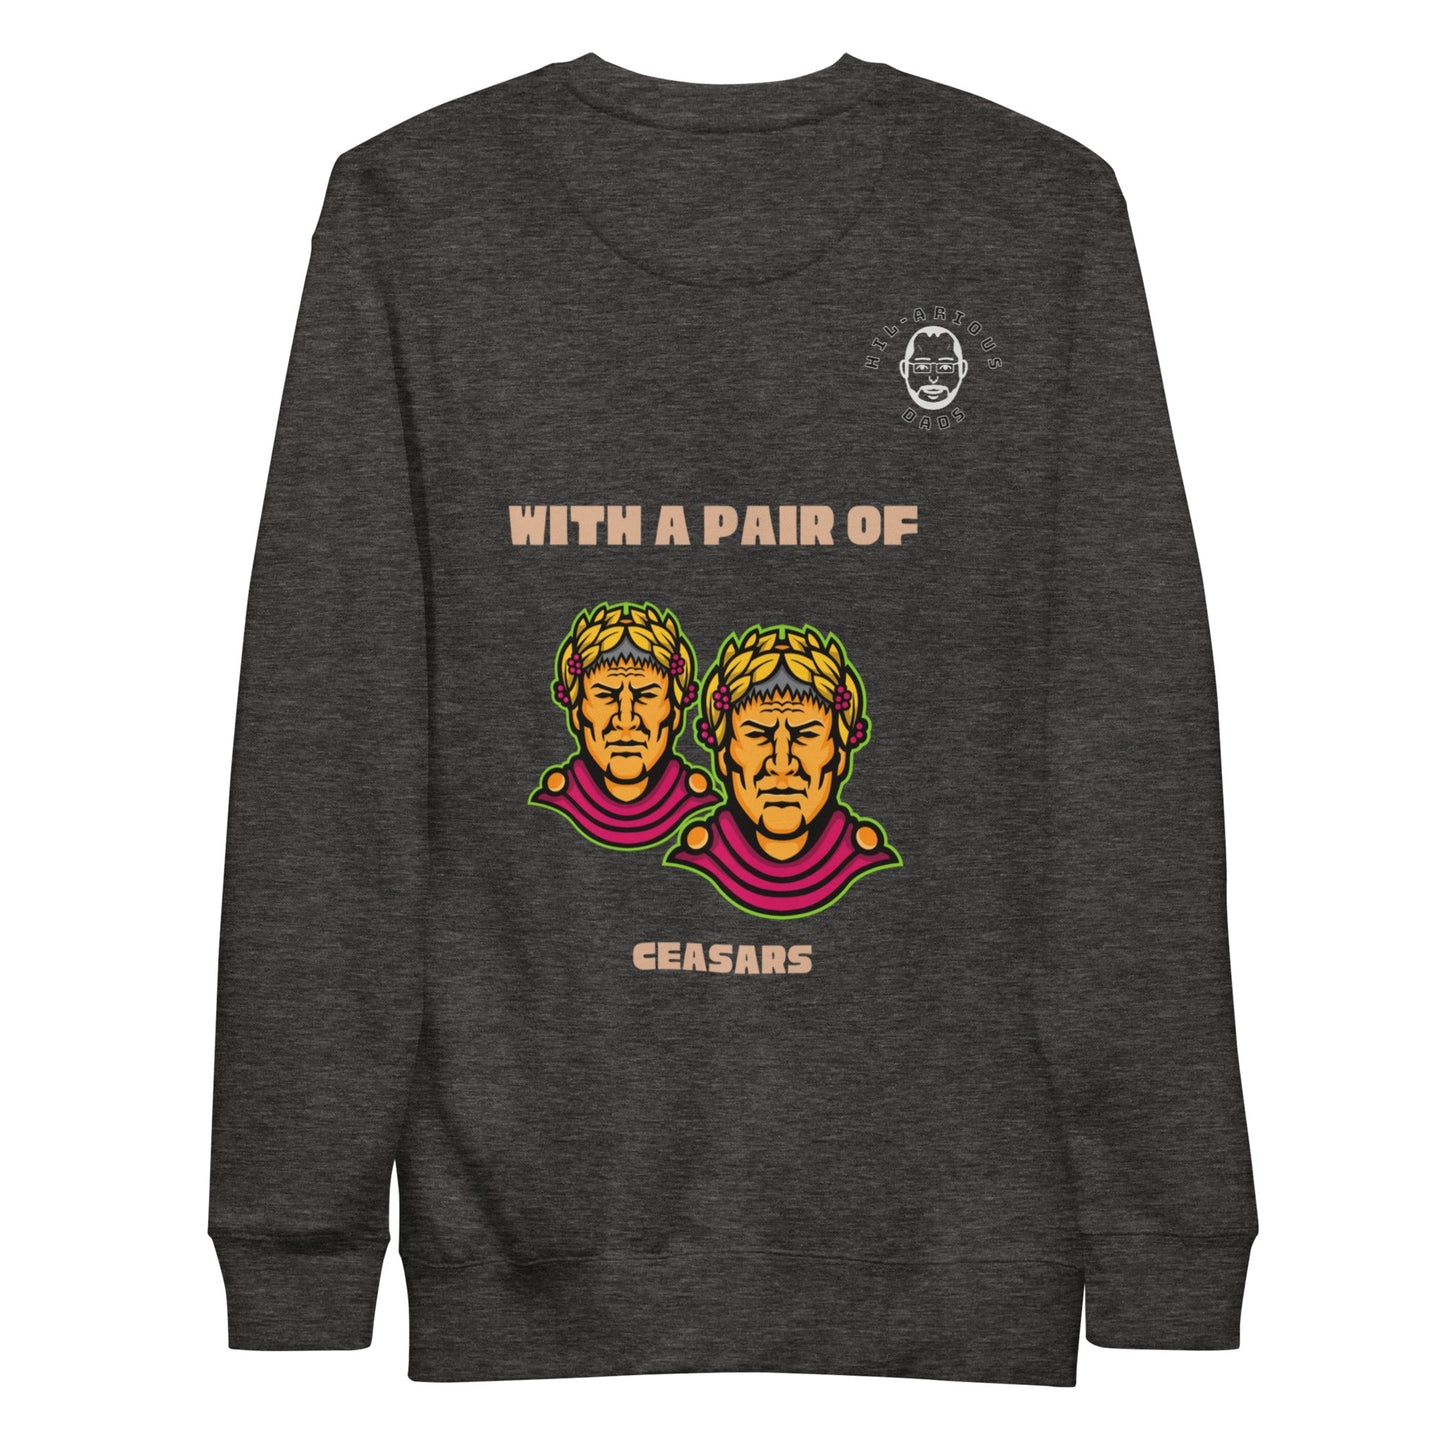 How was Rome split in two?-Sweatshirt - Hil-arious Dads